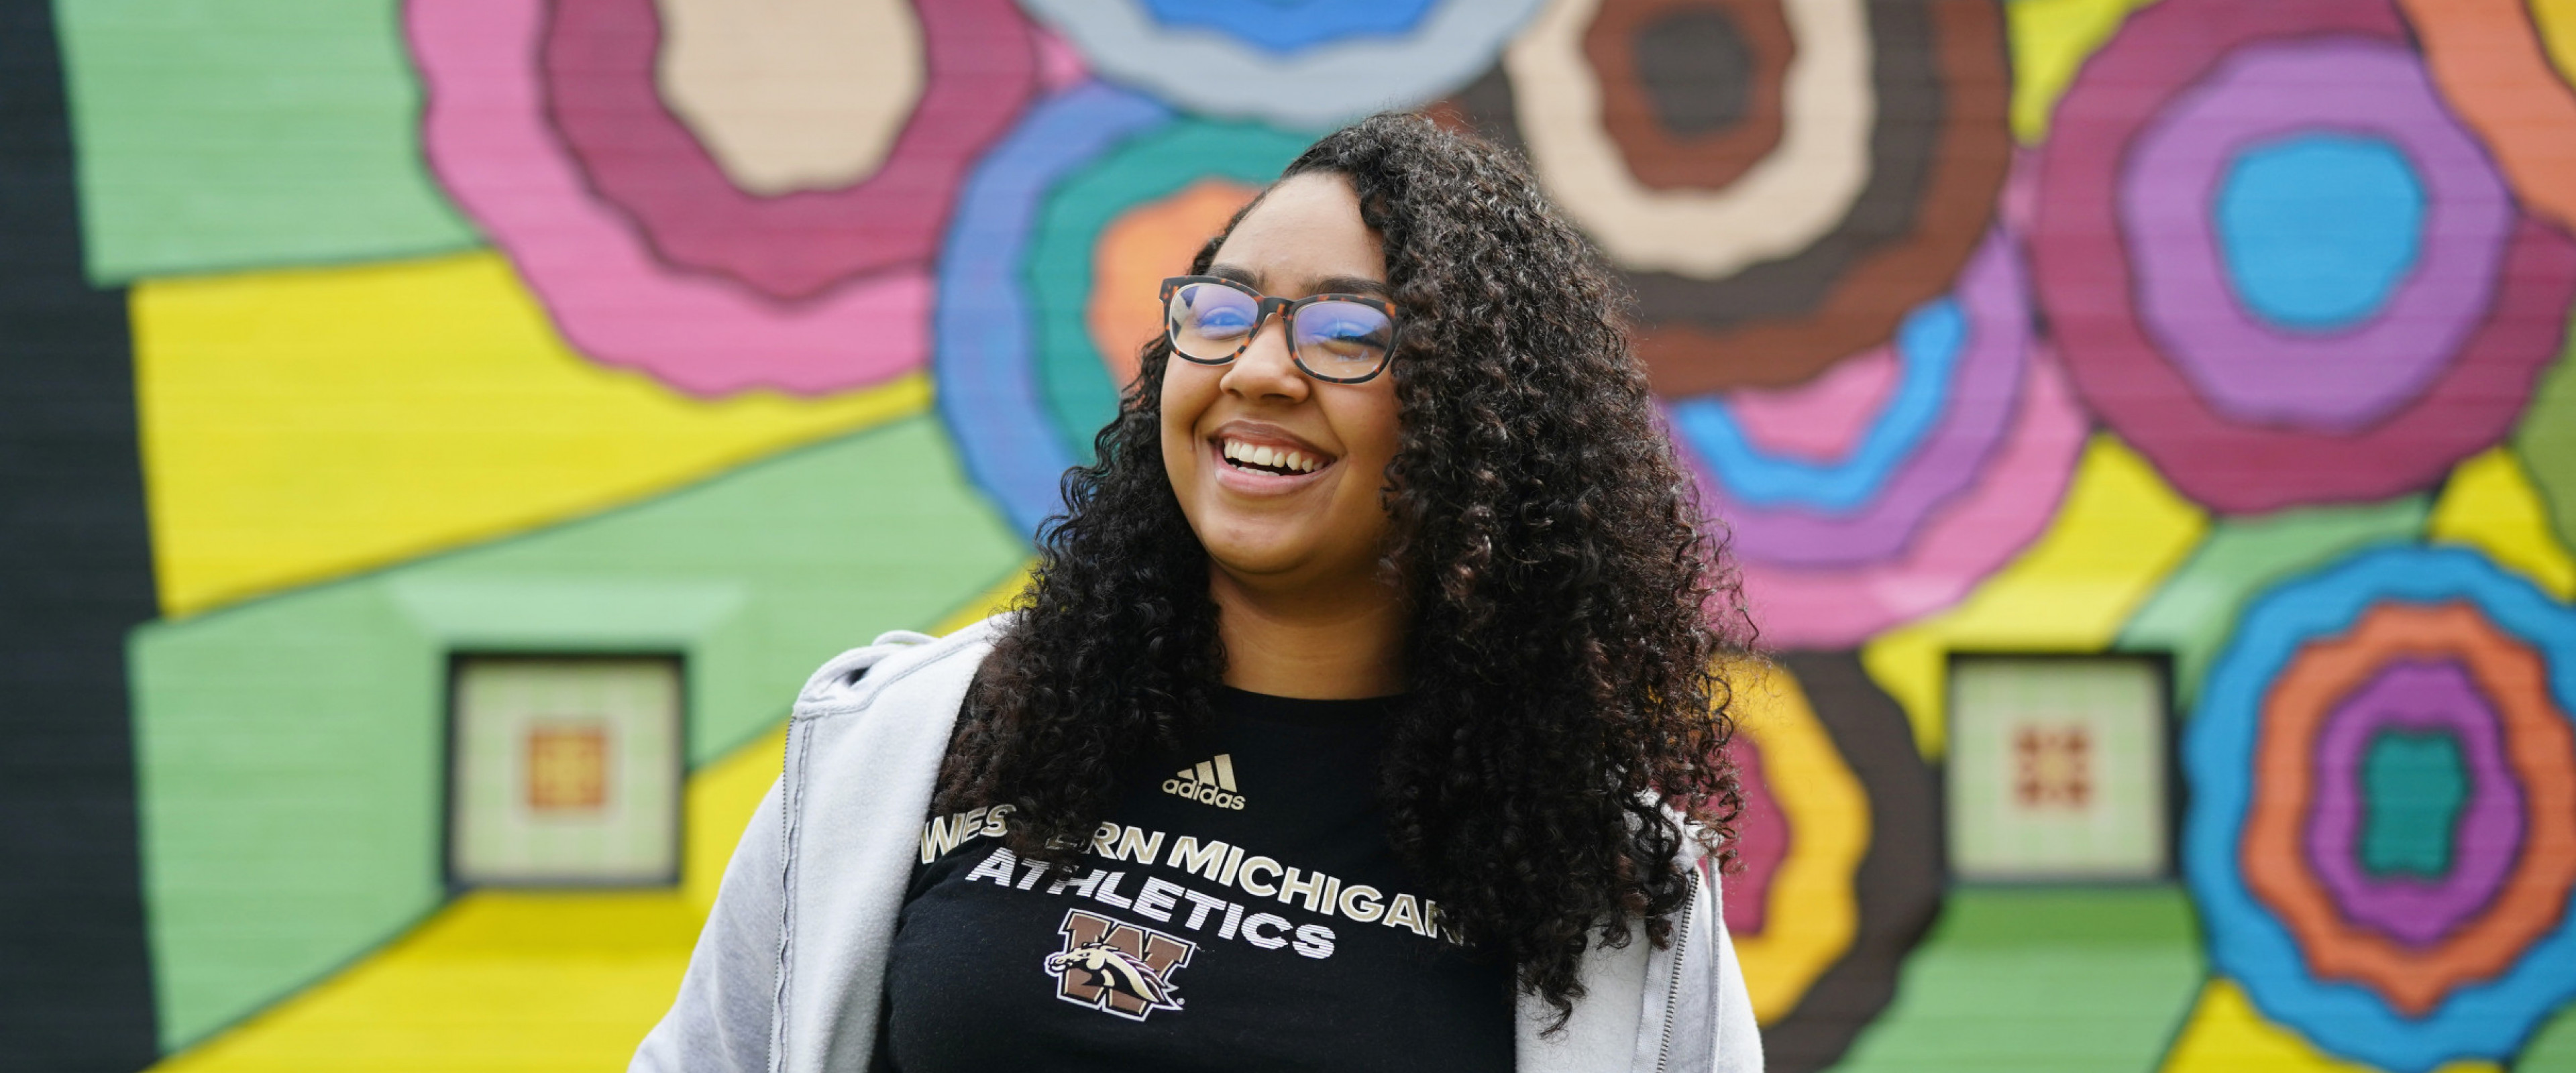 A student smiling in front of a colorful mural wall.